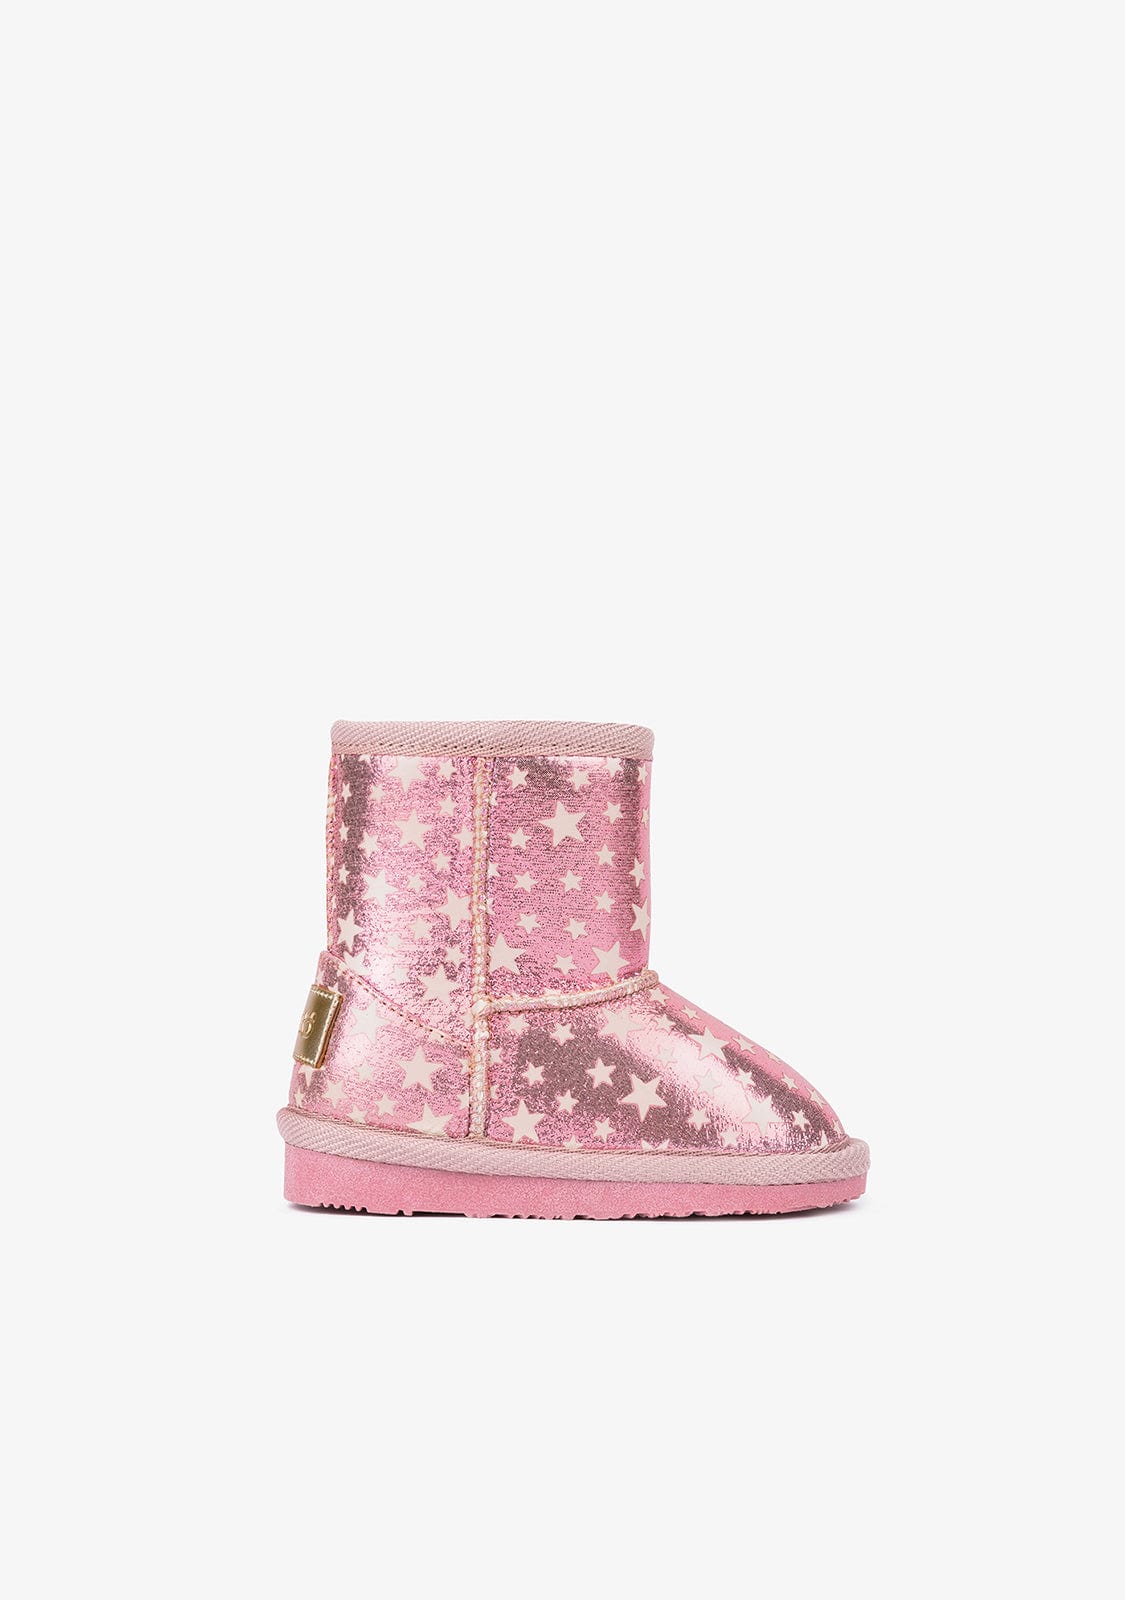 OSITO Shoes Baby's Pink Glows in the Dark Australian Boots